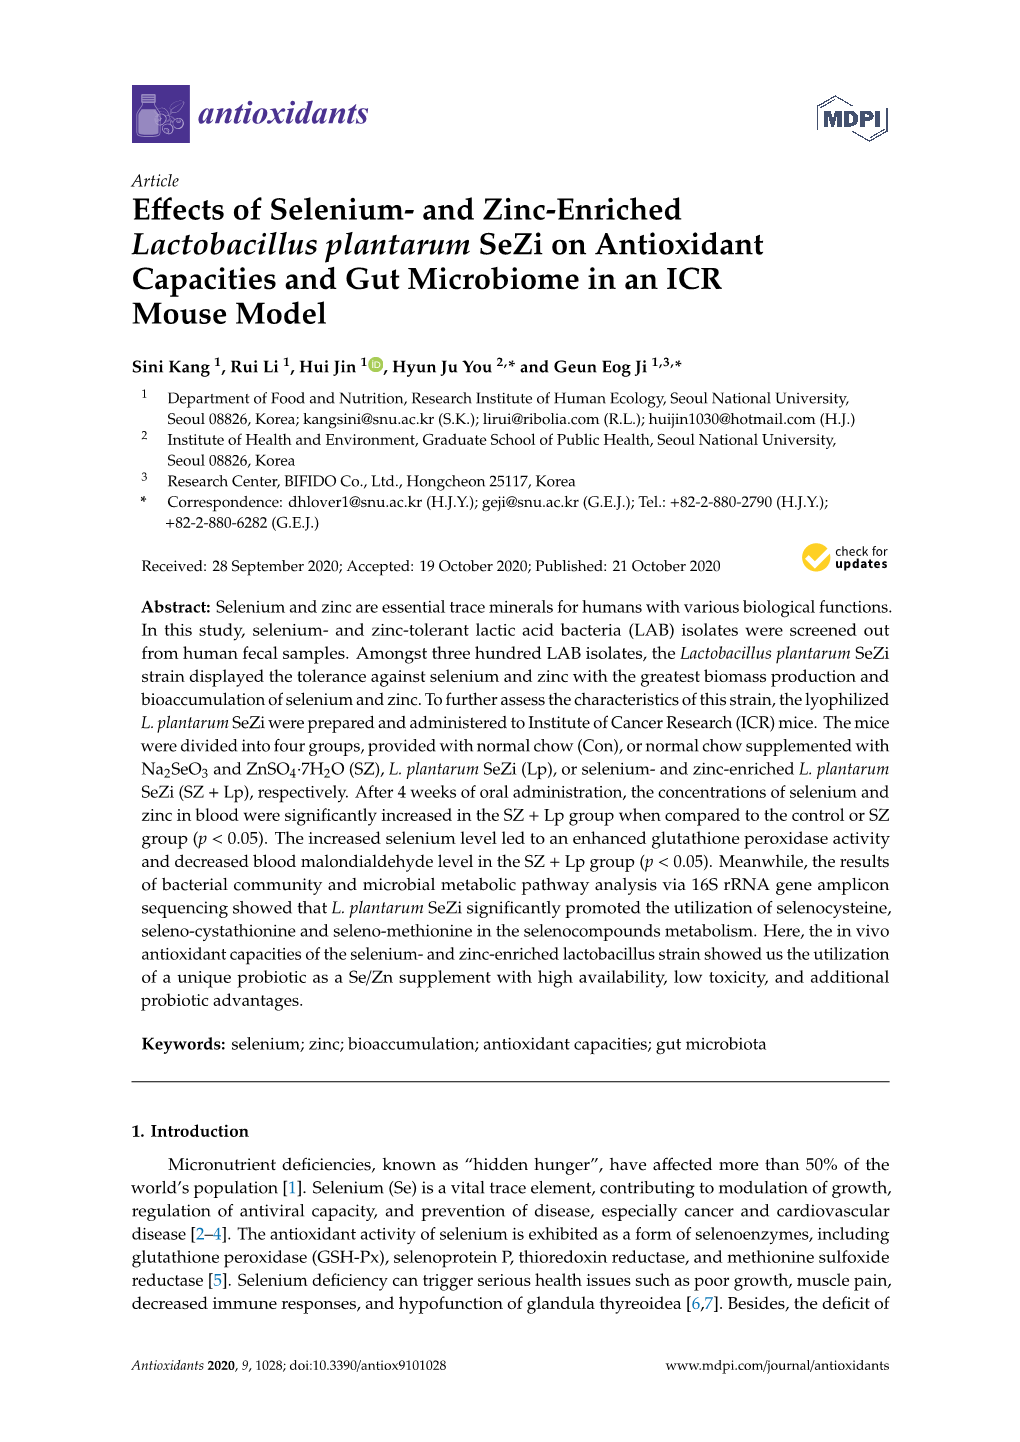 And Zinc-Enriched Lactobacillus Plantarum Sezi on Antioxidant Capacities and Gut Microbiome in an ICR Mouse Model